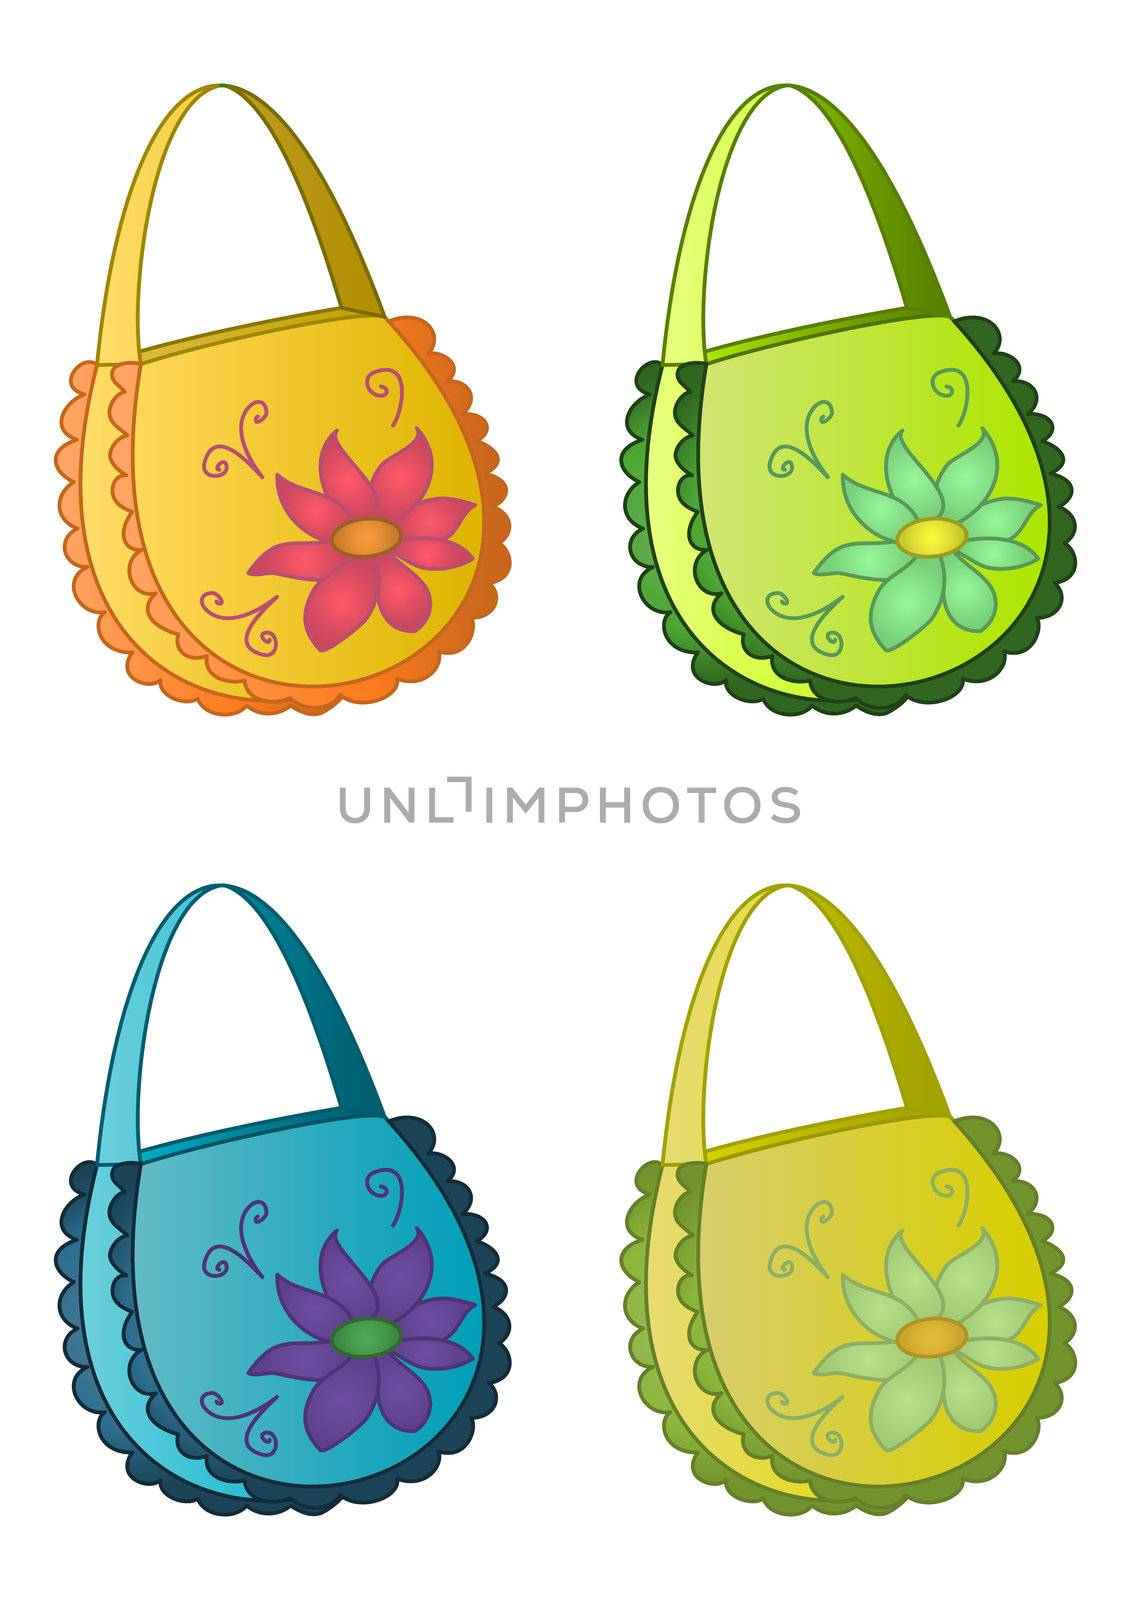 Female multi-coloured handbags with a flower pattern, set